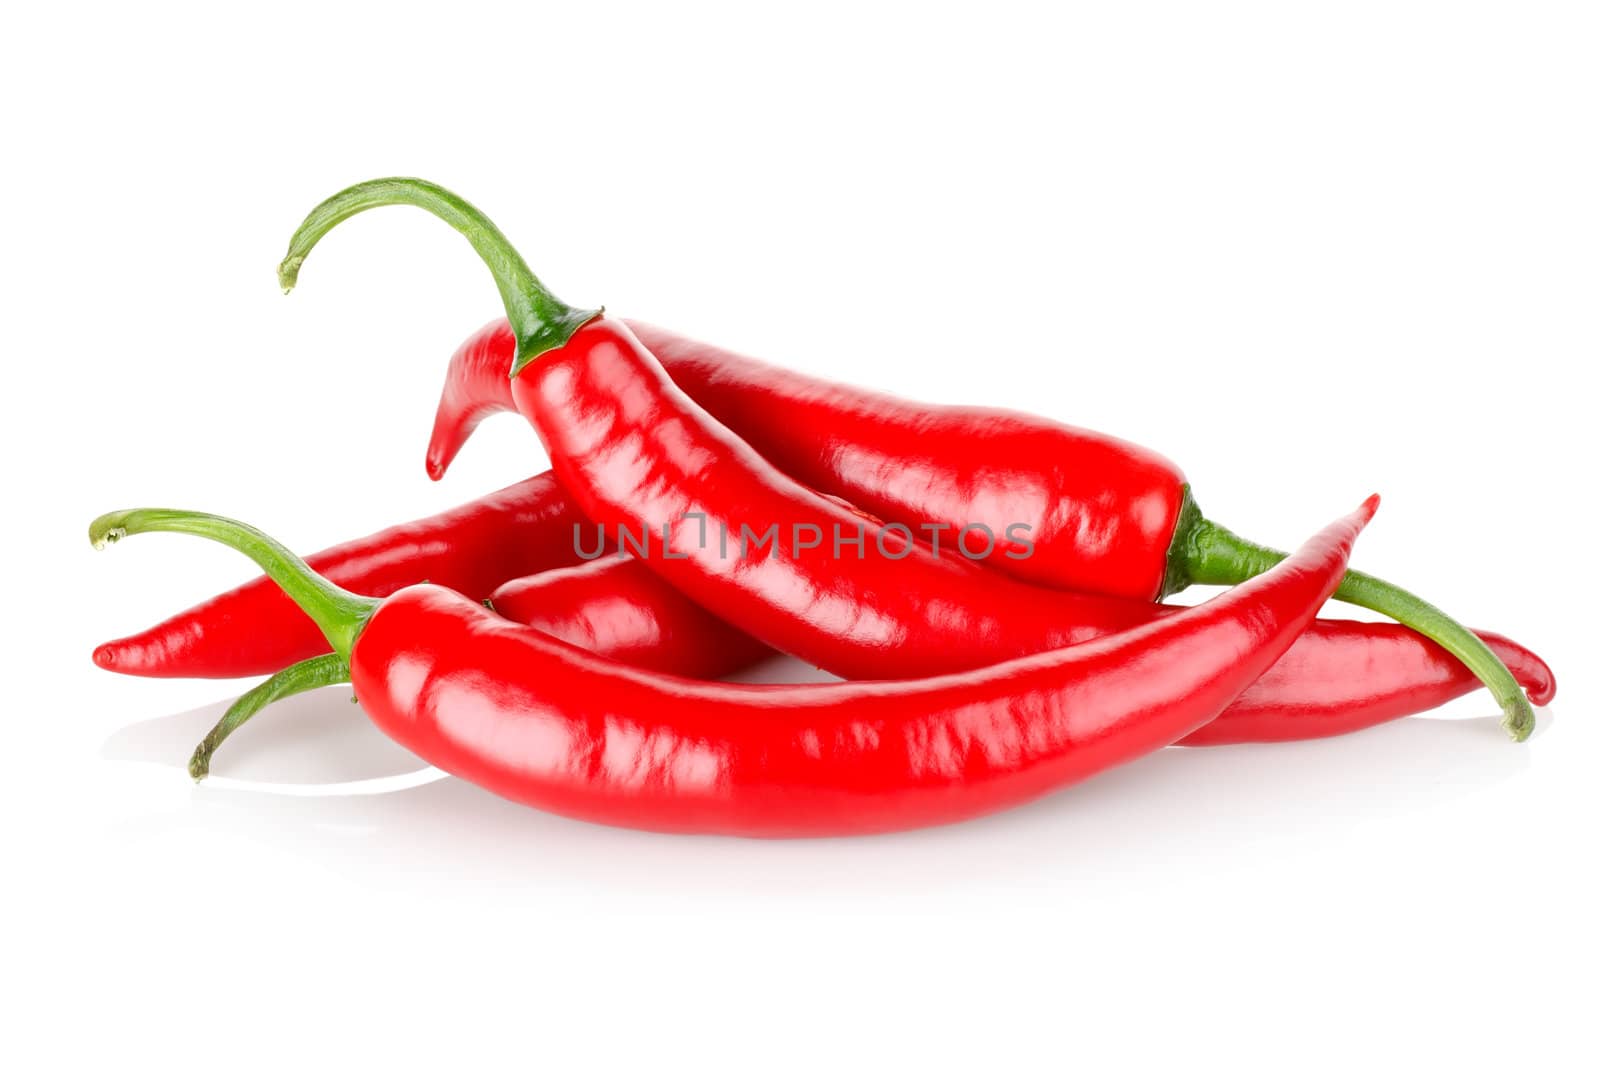 Hot chili peppers by Givaga